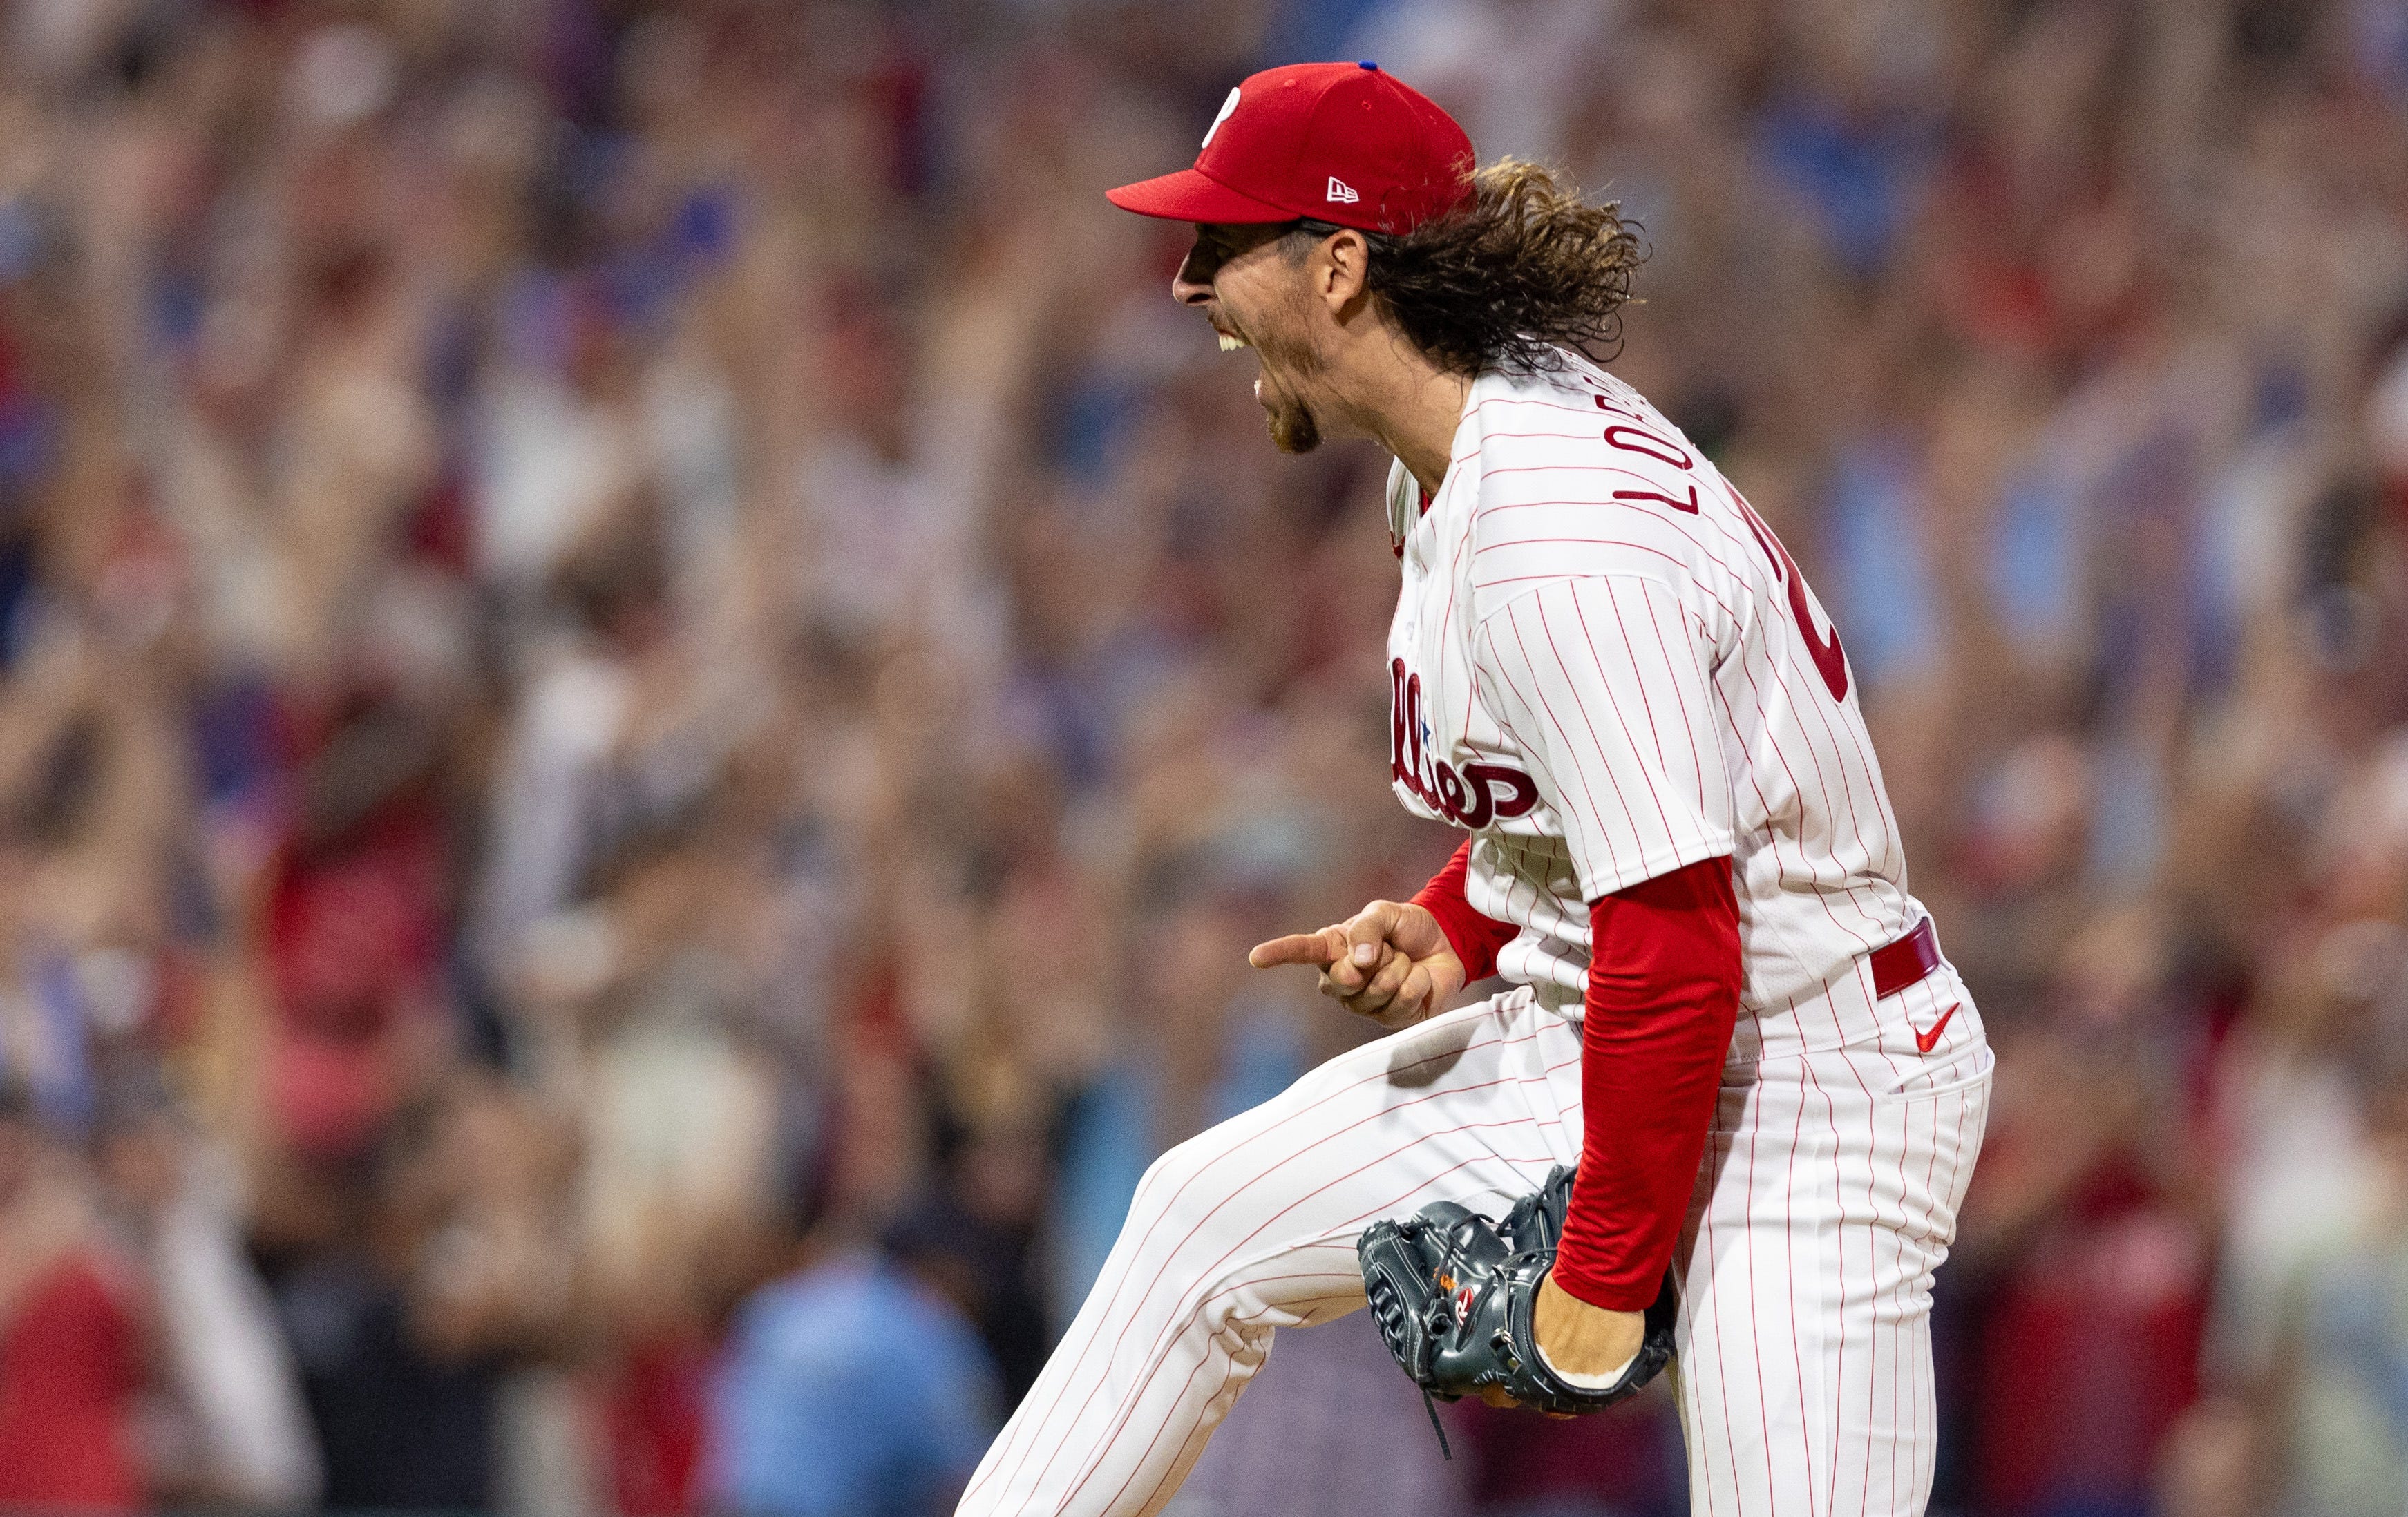 MLB: Recent no-hitters tossed in baseball